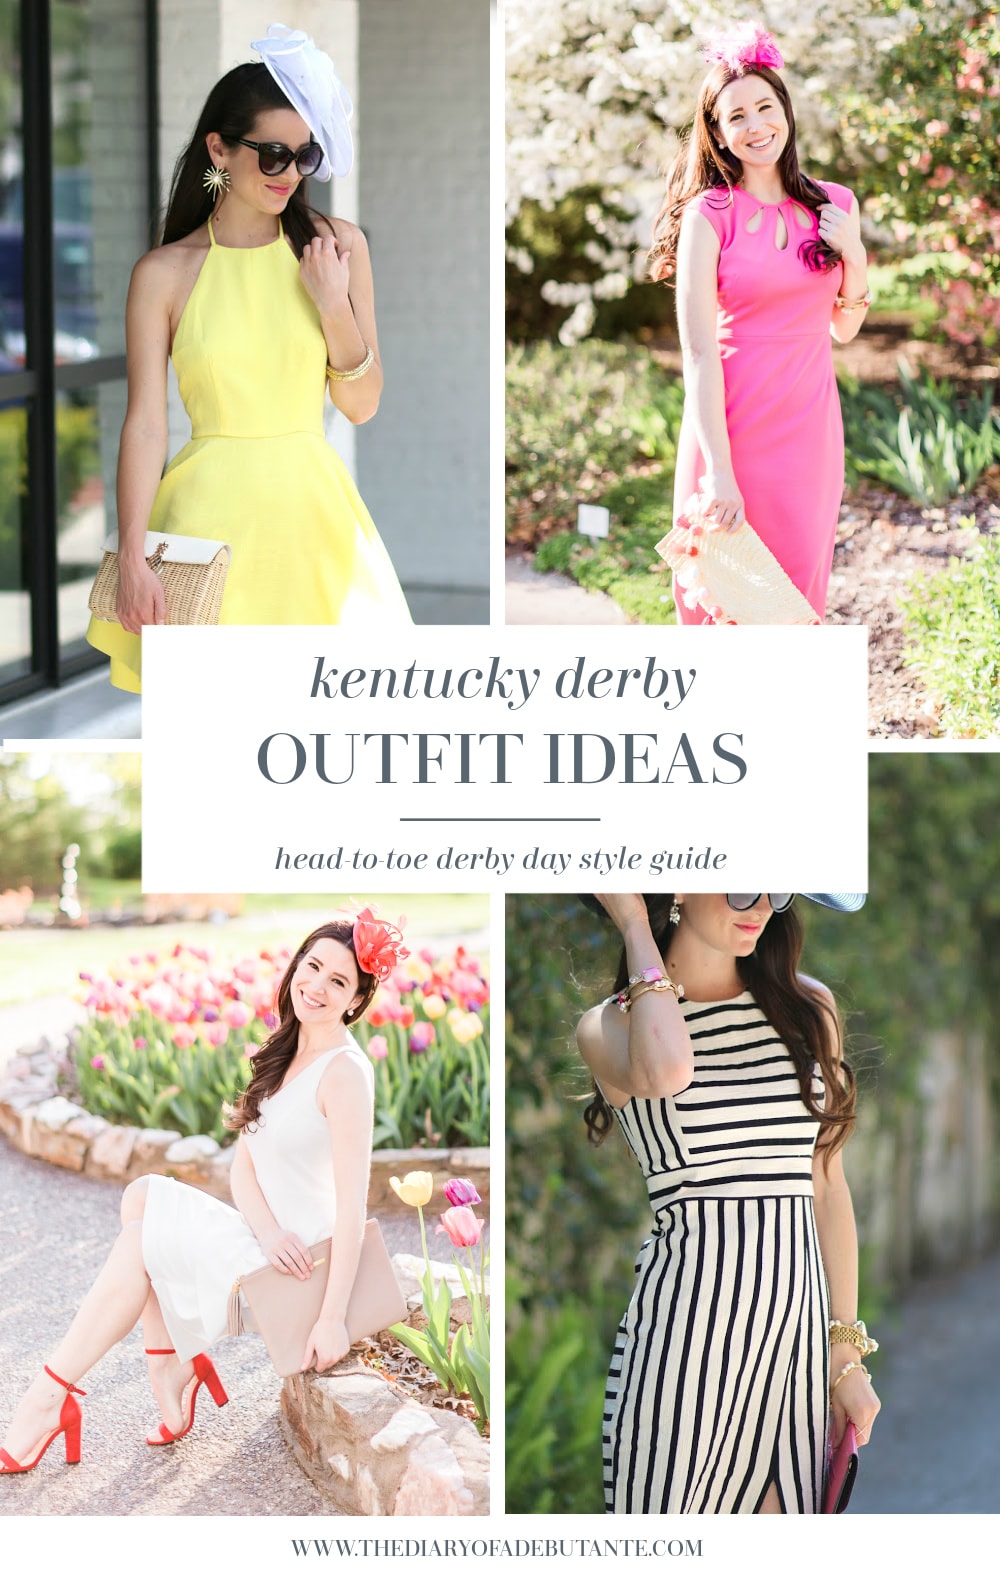 Kentucky derby outfit ideas styled by affordable fashion blogger Stephanie Ziajka on Diary of a Debutante